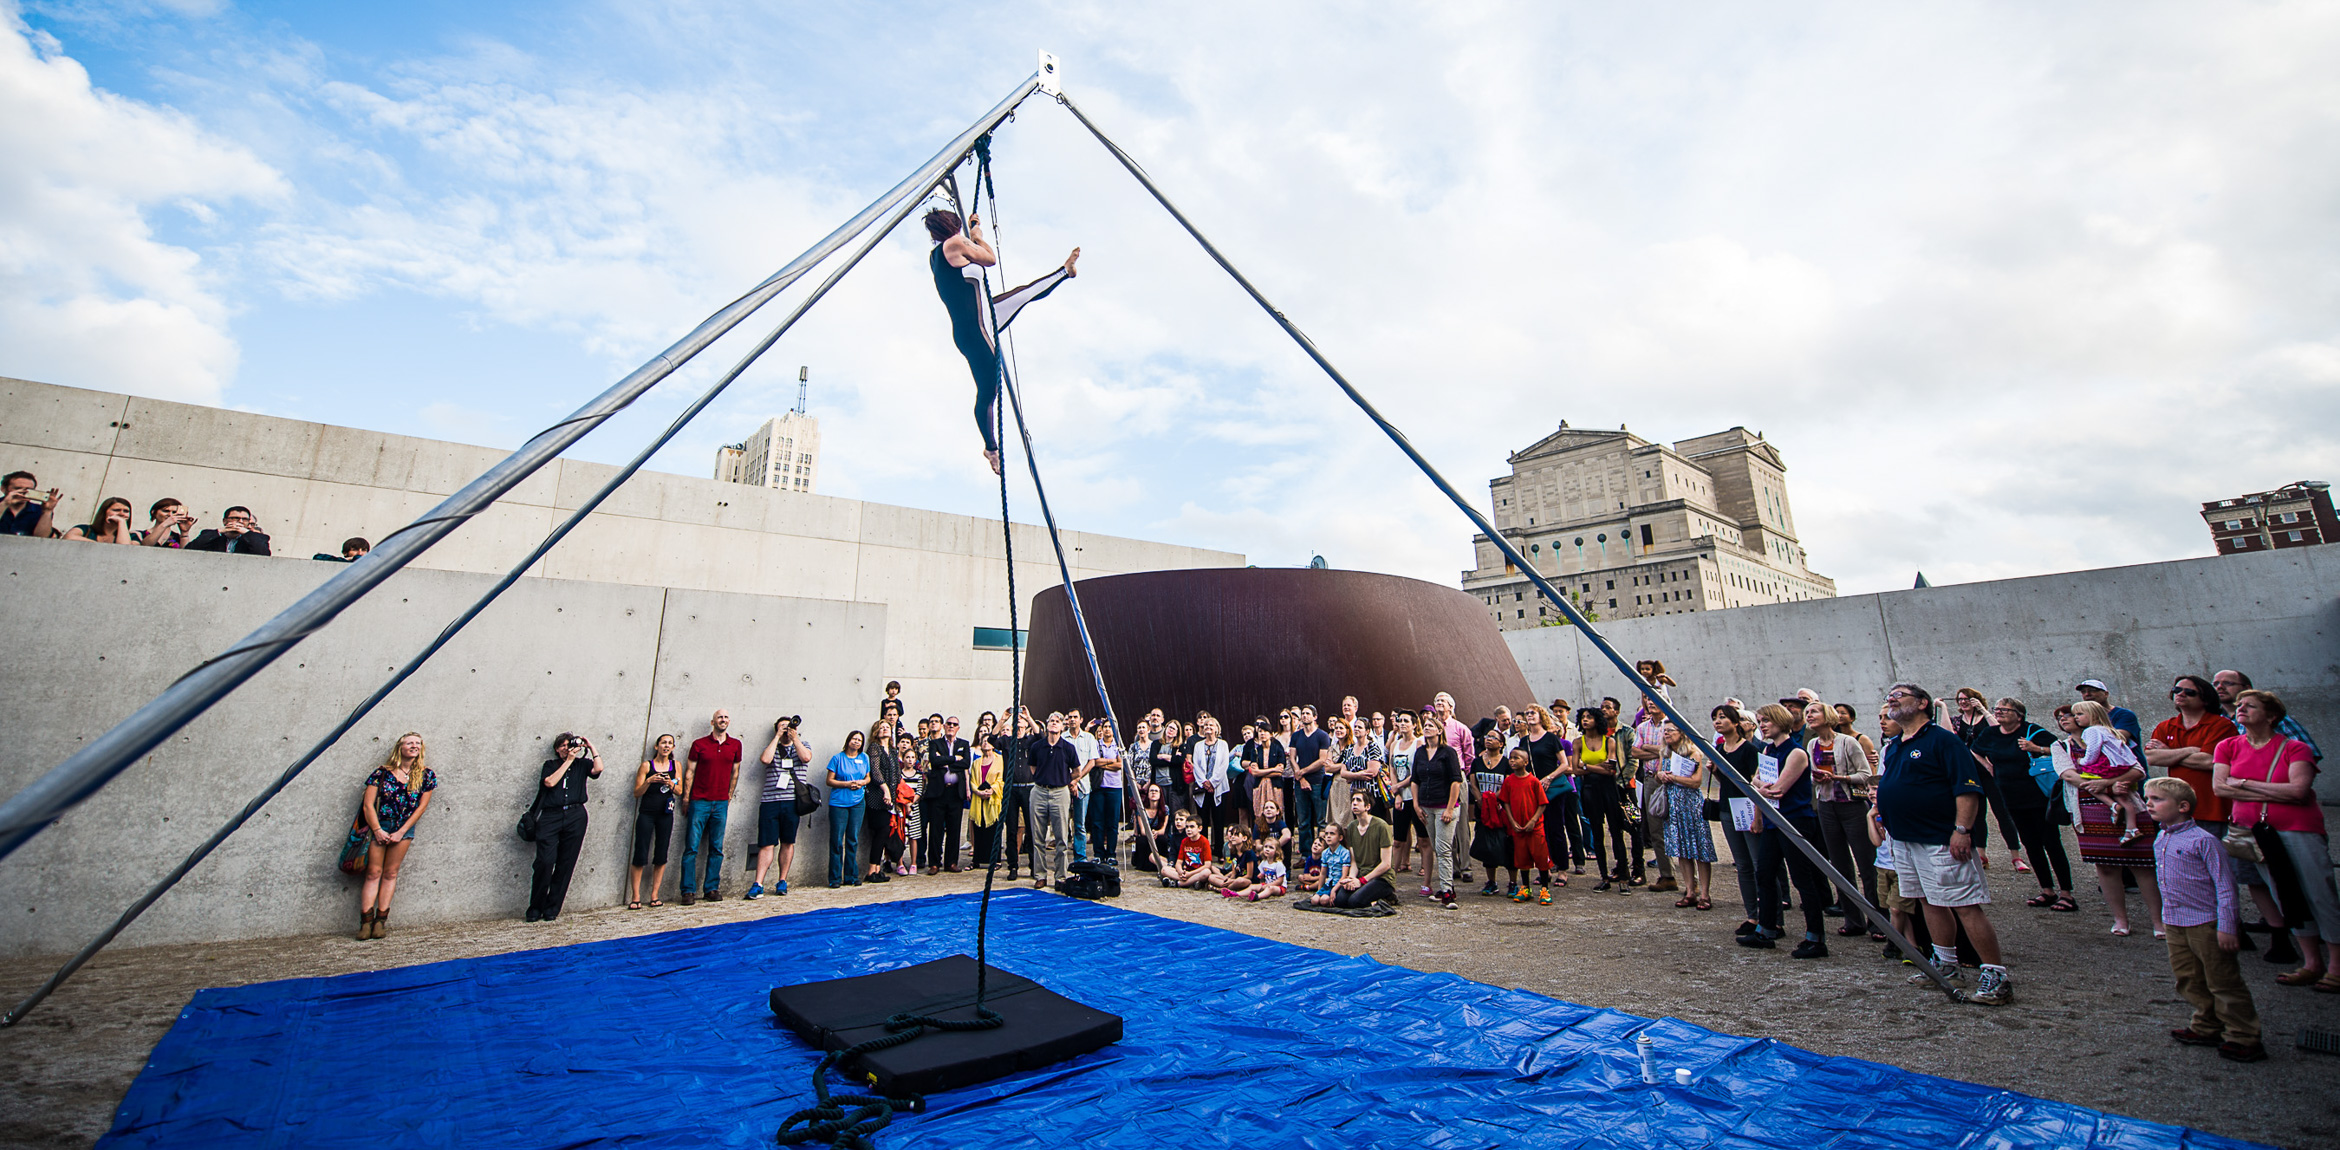 A trapeze artist from Circus Flora climbs a rope in a constructed pyramid, performing for large crowd in the Courtyard.